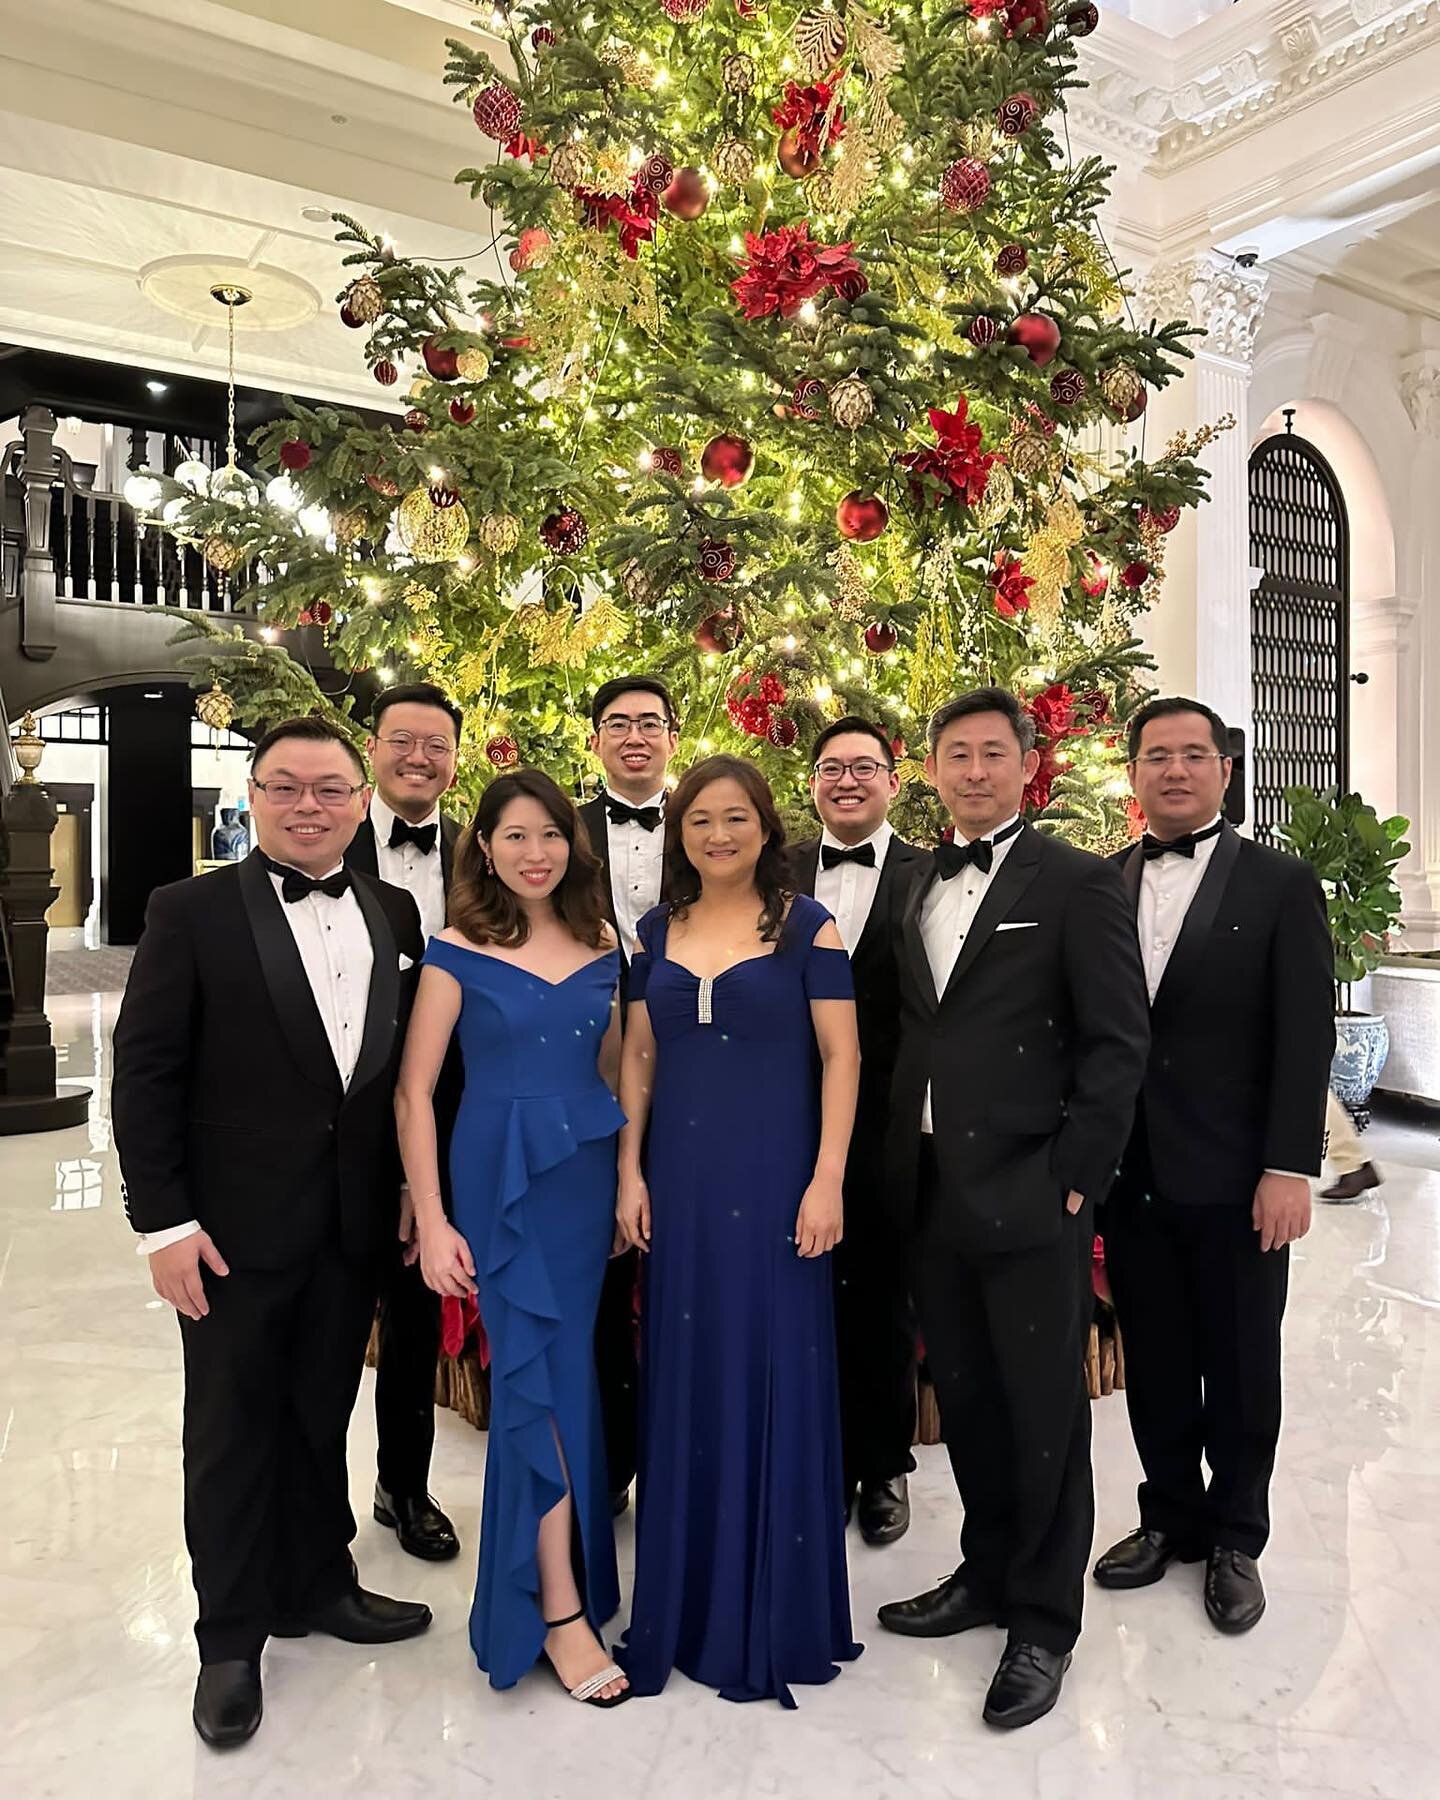 A privilege to be singing at @raffleshotelsingapore for their yearly tree lighting ceremony! And doesn&rsquo;t everyone look GLAMOROUS ✨✨✨ We had a blast last year and it was great to be back 🌟 singing O Christmas Tree in front of the massive Christ